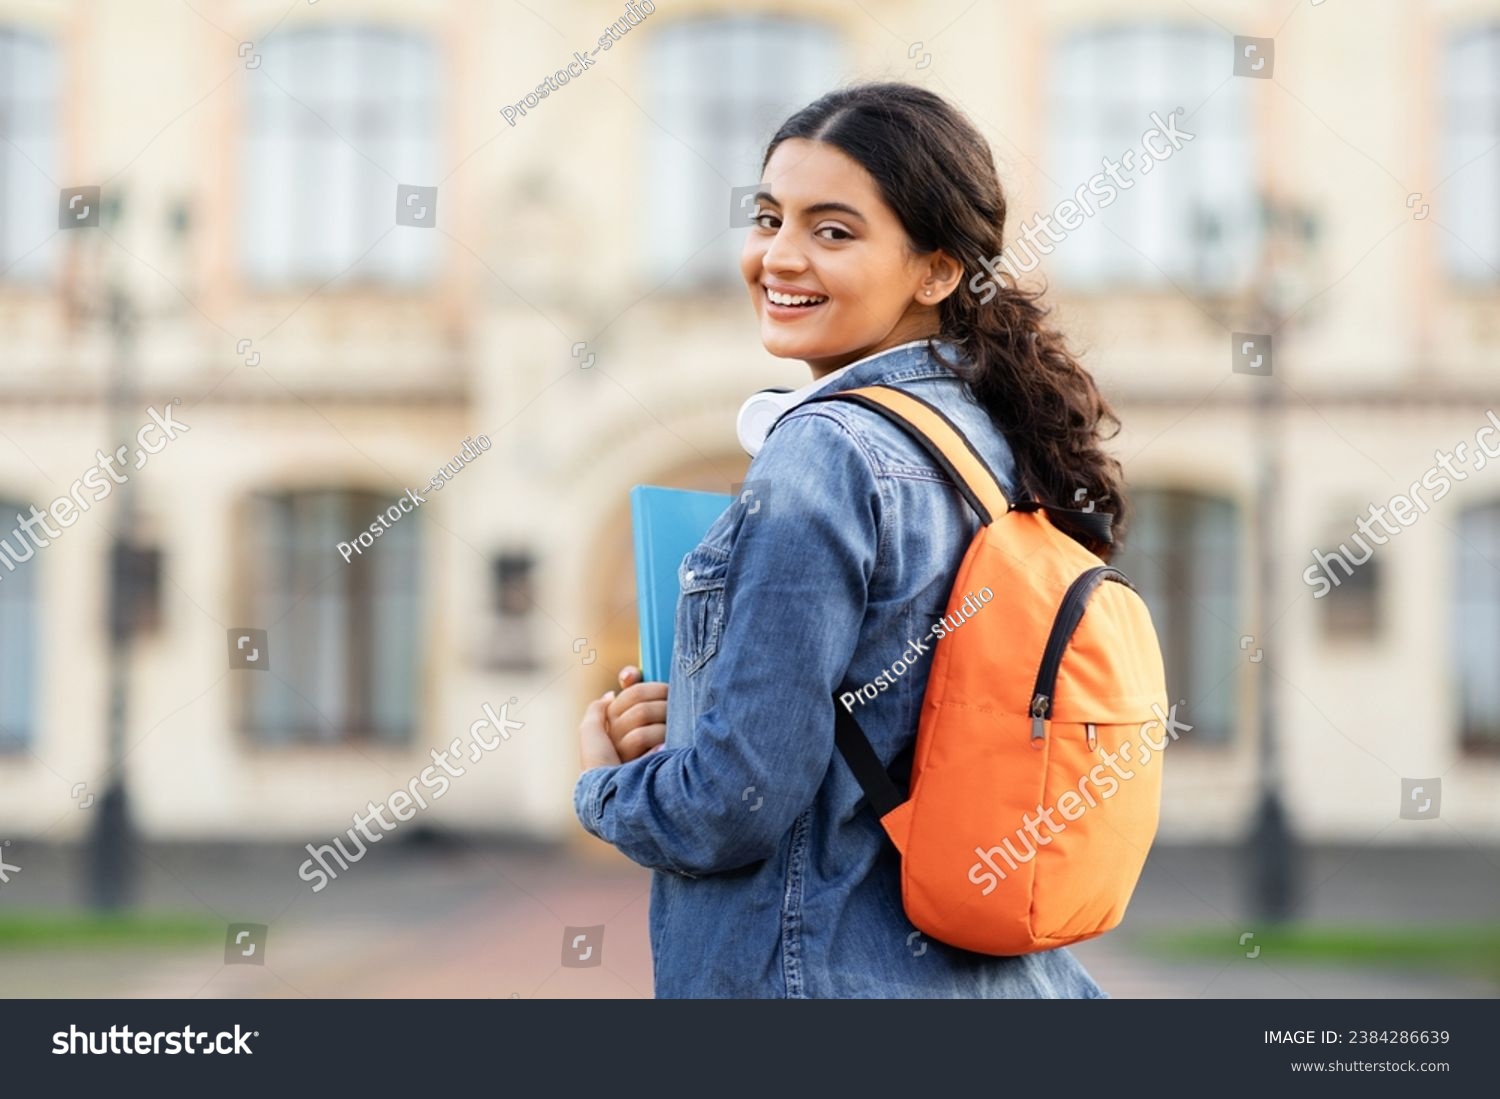 A radiant young Indian scholar with her academic books and bag, posing outside her educational institution, offering a warm smile to the lens. Space for caption, emphasizing education. #2384286639